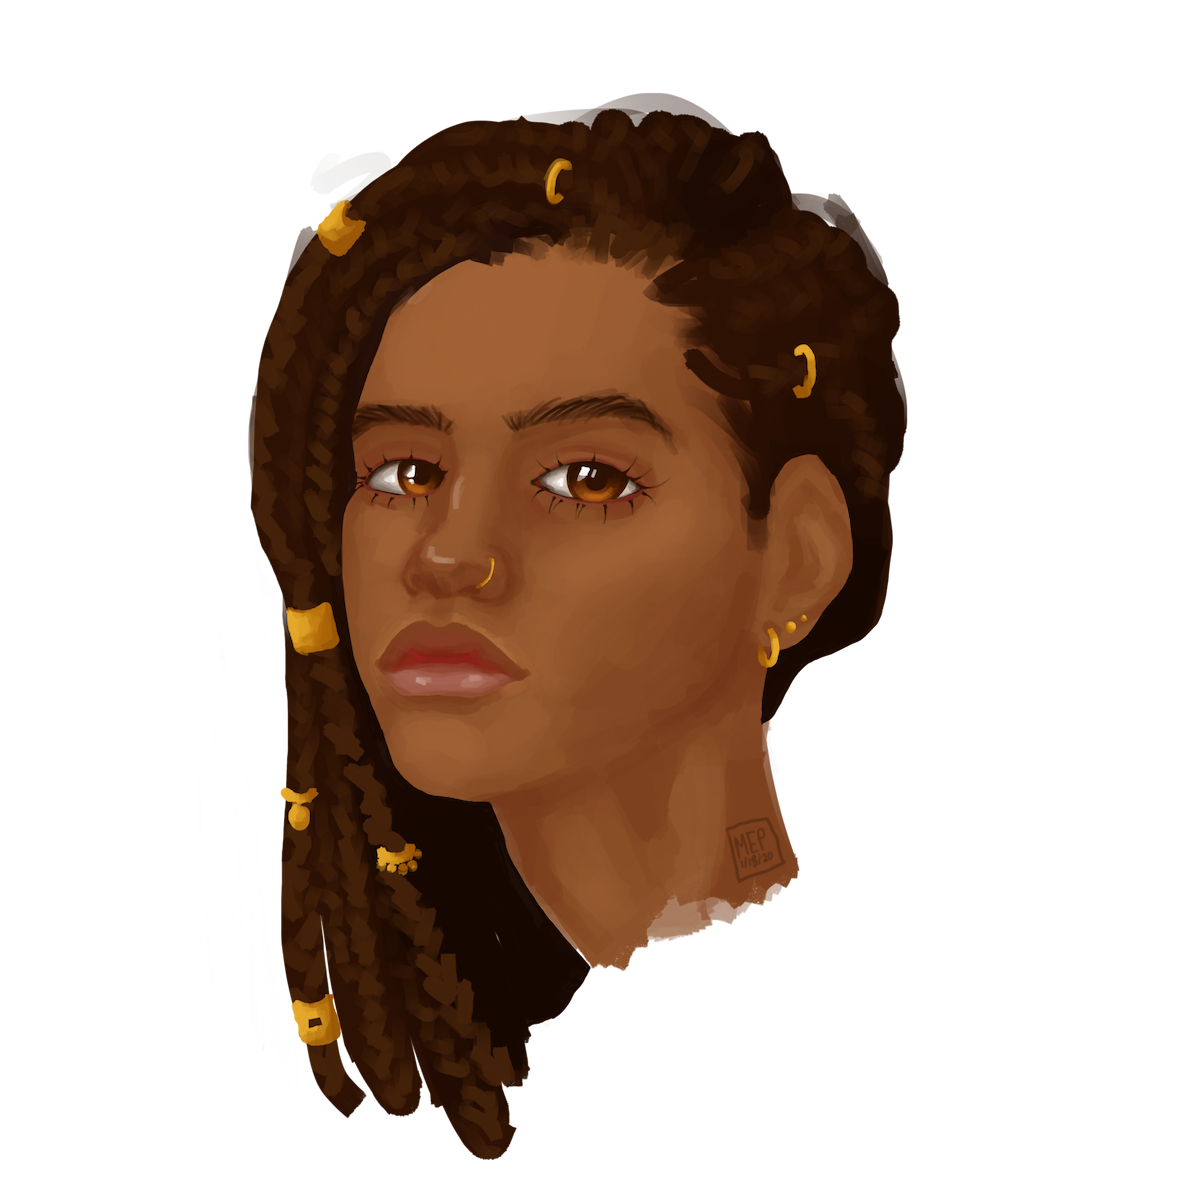 a digital portrait painting of a woman with braided hair and gold jewelry on her hair and ears